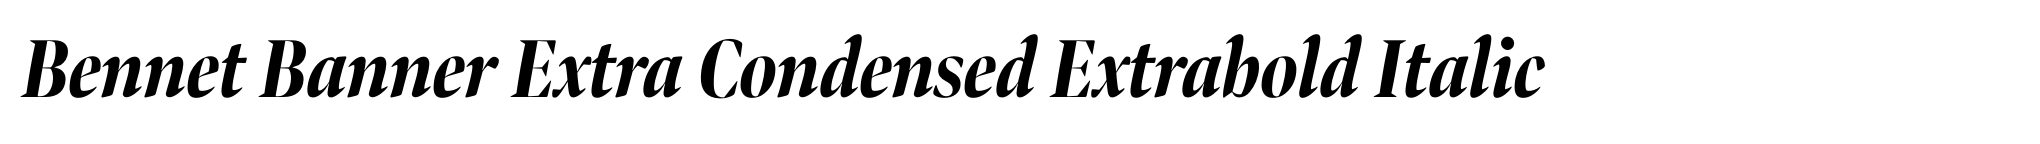 Bennet Banner Extra Condensed Extrabold Italic image